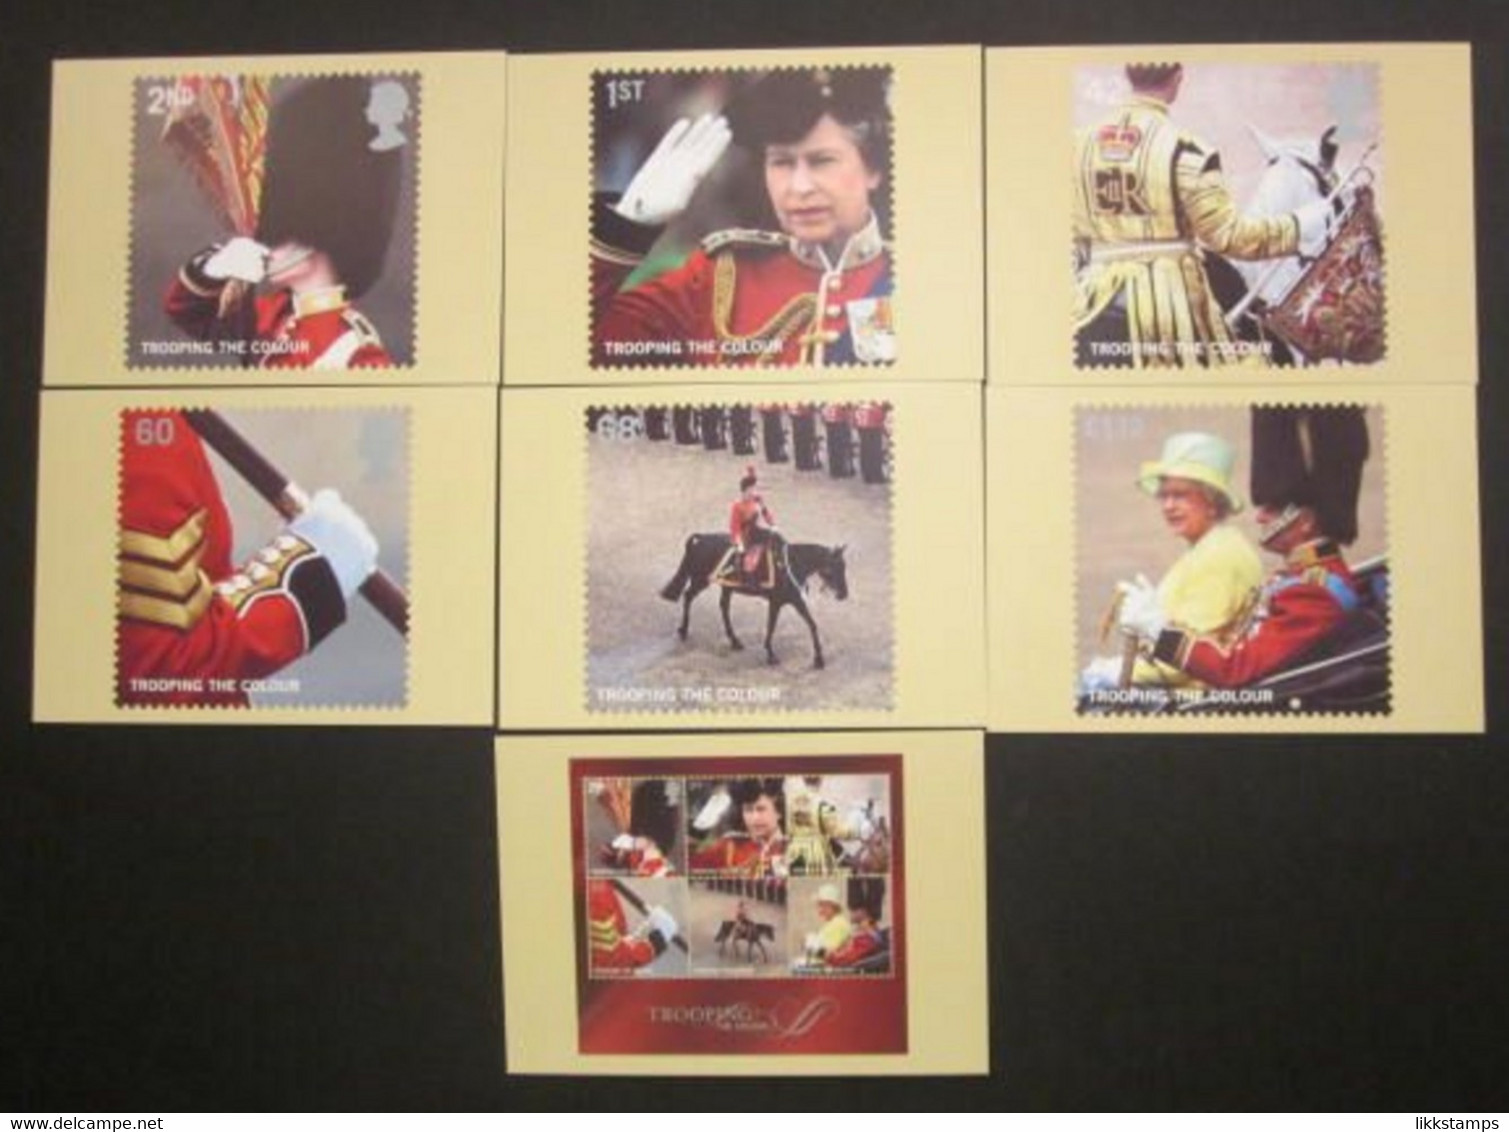 2005 TROOPING THE COLOUR P.H.Q. CARDS UNUSED, ISSUE No. 276 (B) #00839 - Cartes PHQ